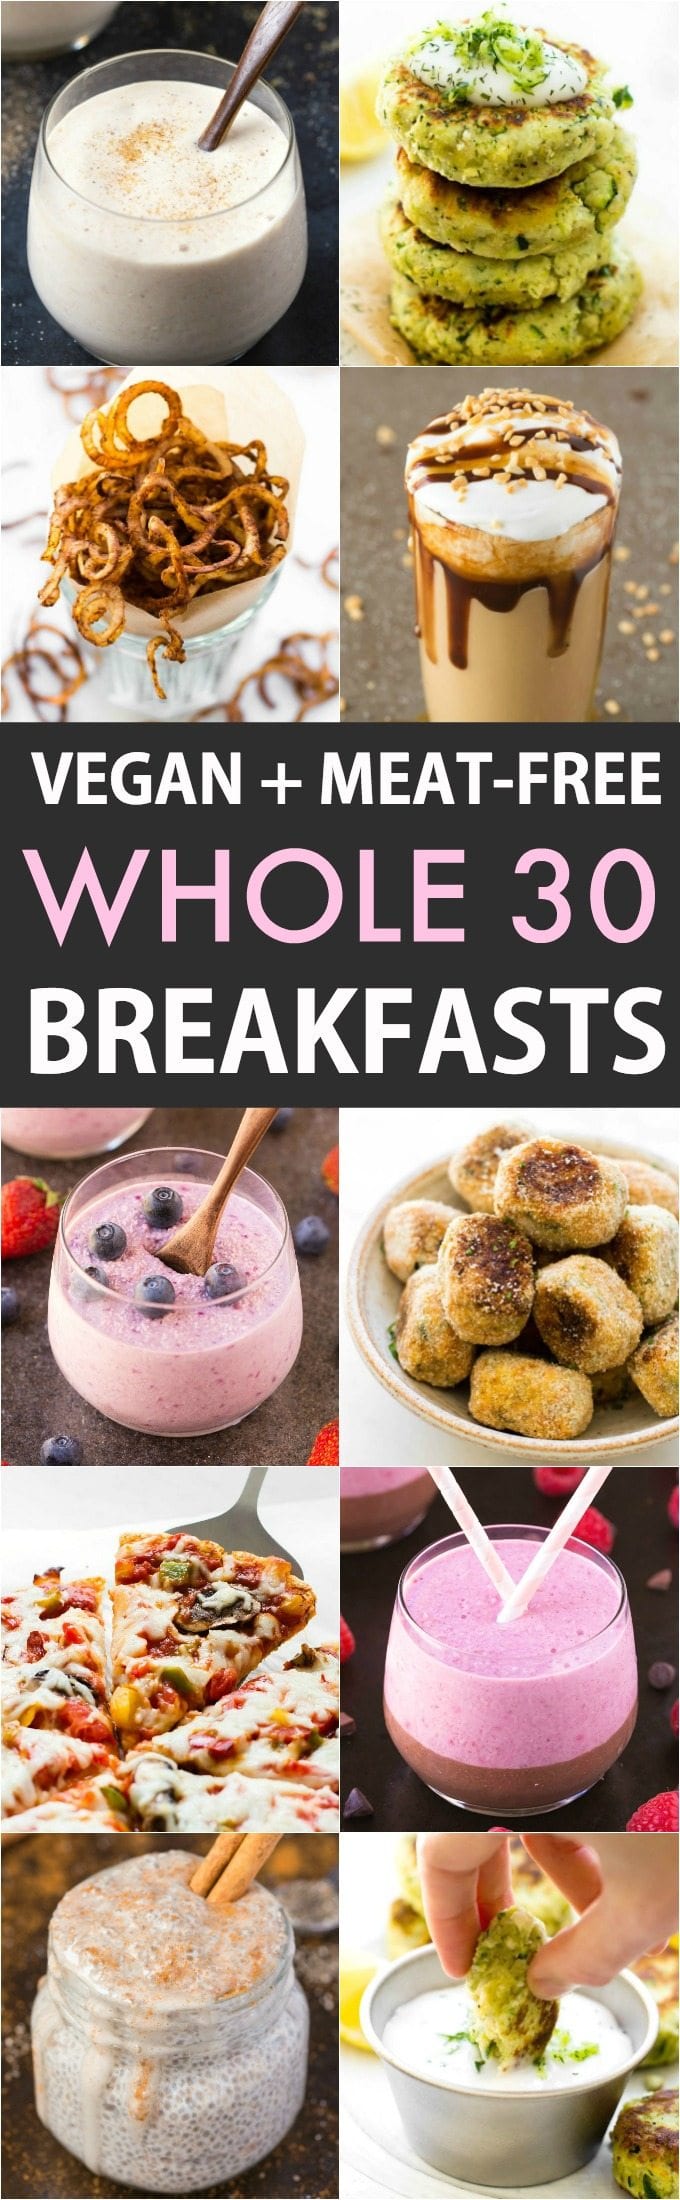 Meat-Free + Vegan WHOLE30 Breakfast Recipes (Paleo, Whole30, Gluten Free, Keto)- The BEST quick and easy whole30 breakfasts made 100% plant based- Sweet and savory options! #whole30 #meatfree #vegan #whole30recipes #whole30breakfasts- Recipes on thebigmansworld.com 